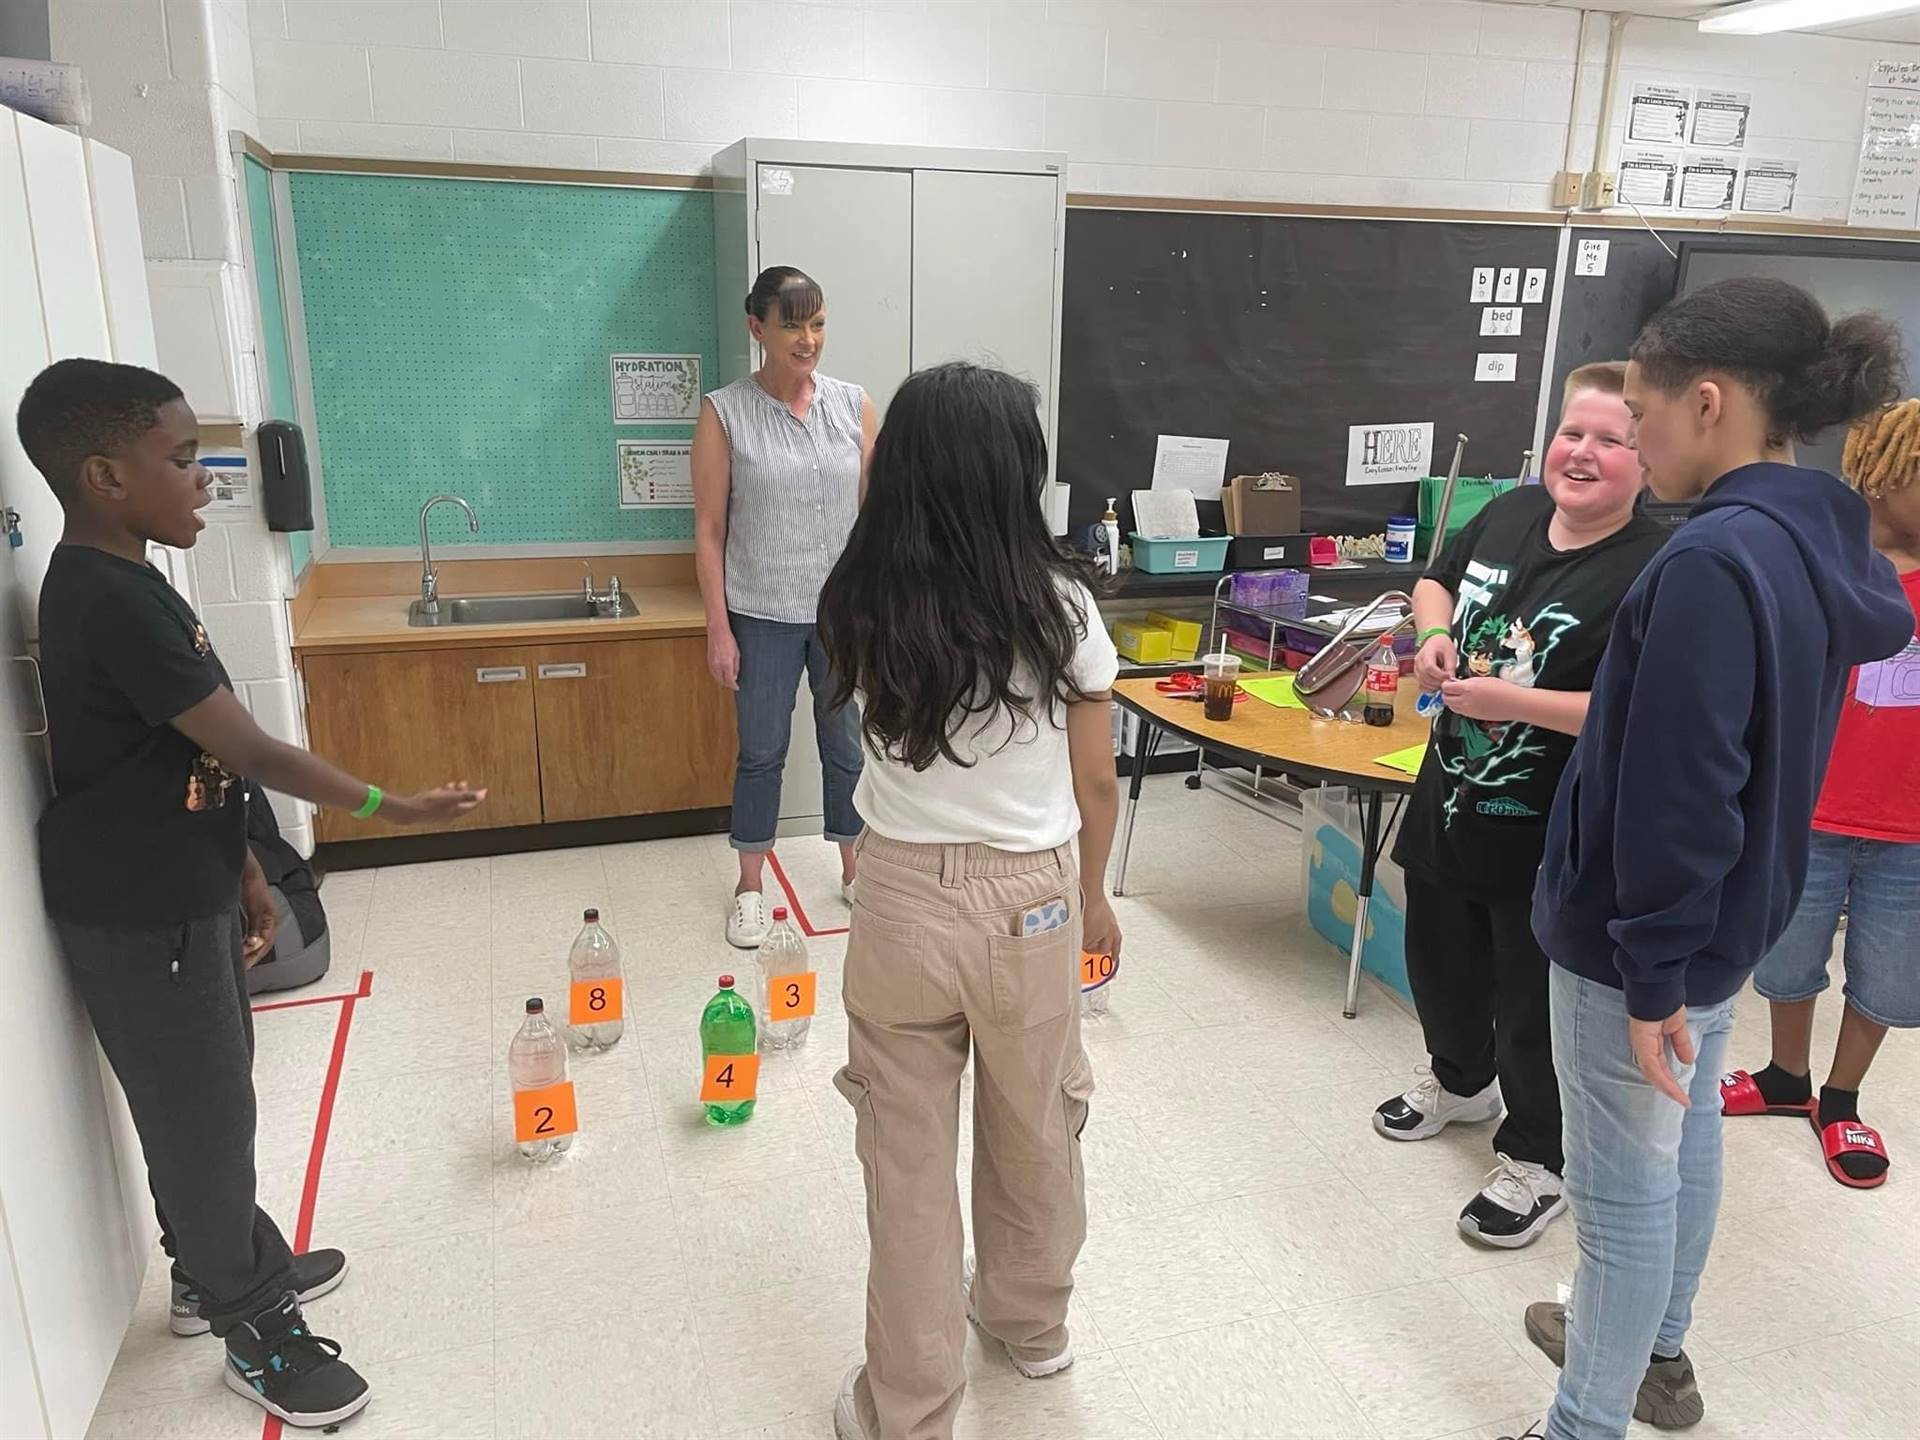 Teacher and students playing a game